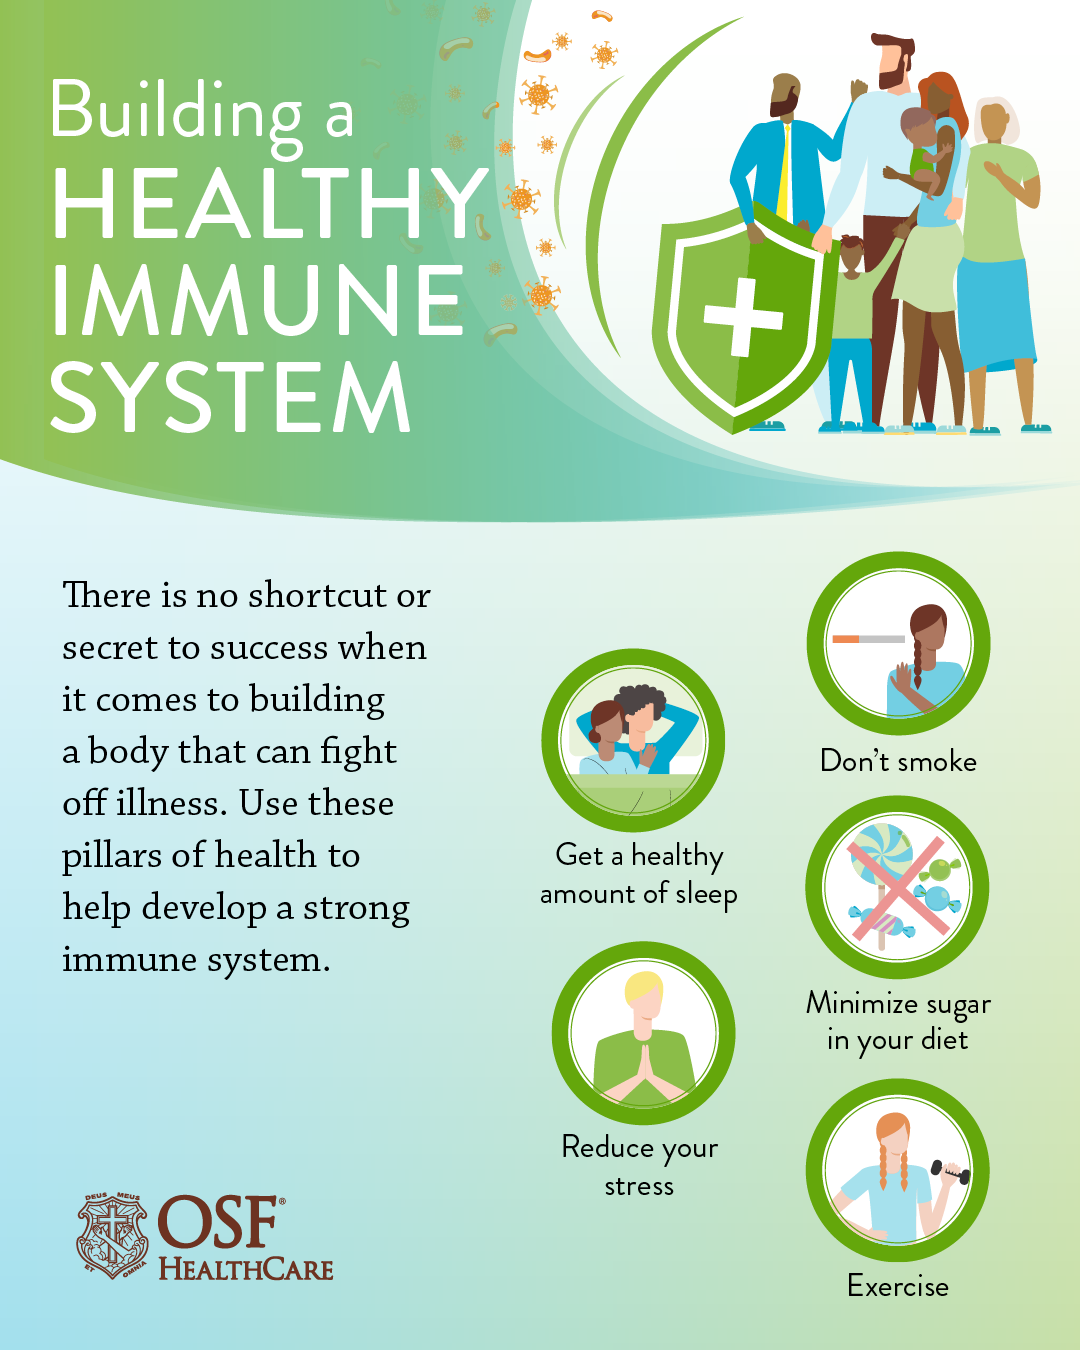 Is there such thing as a strong immune system?